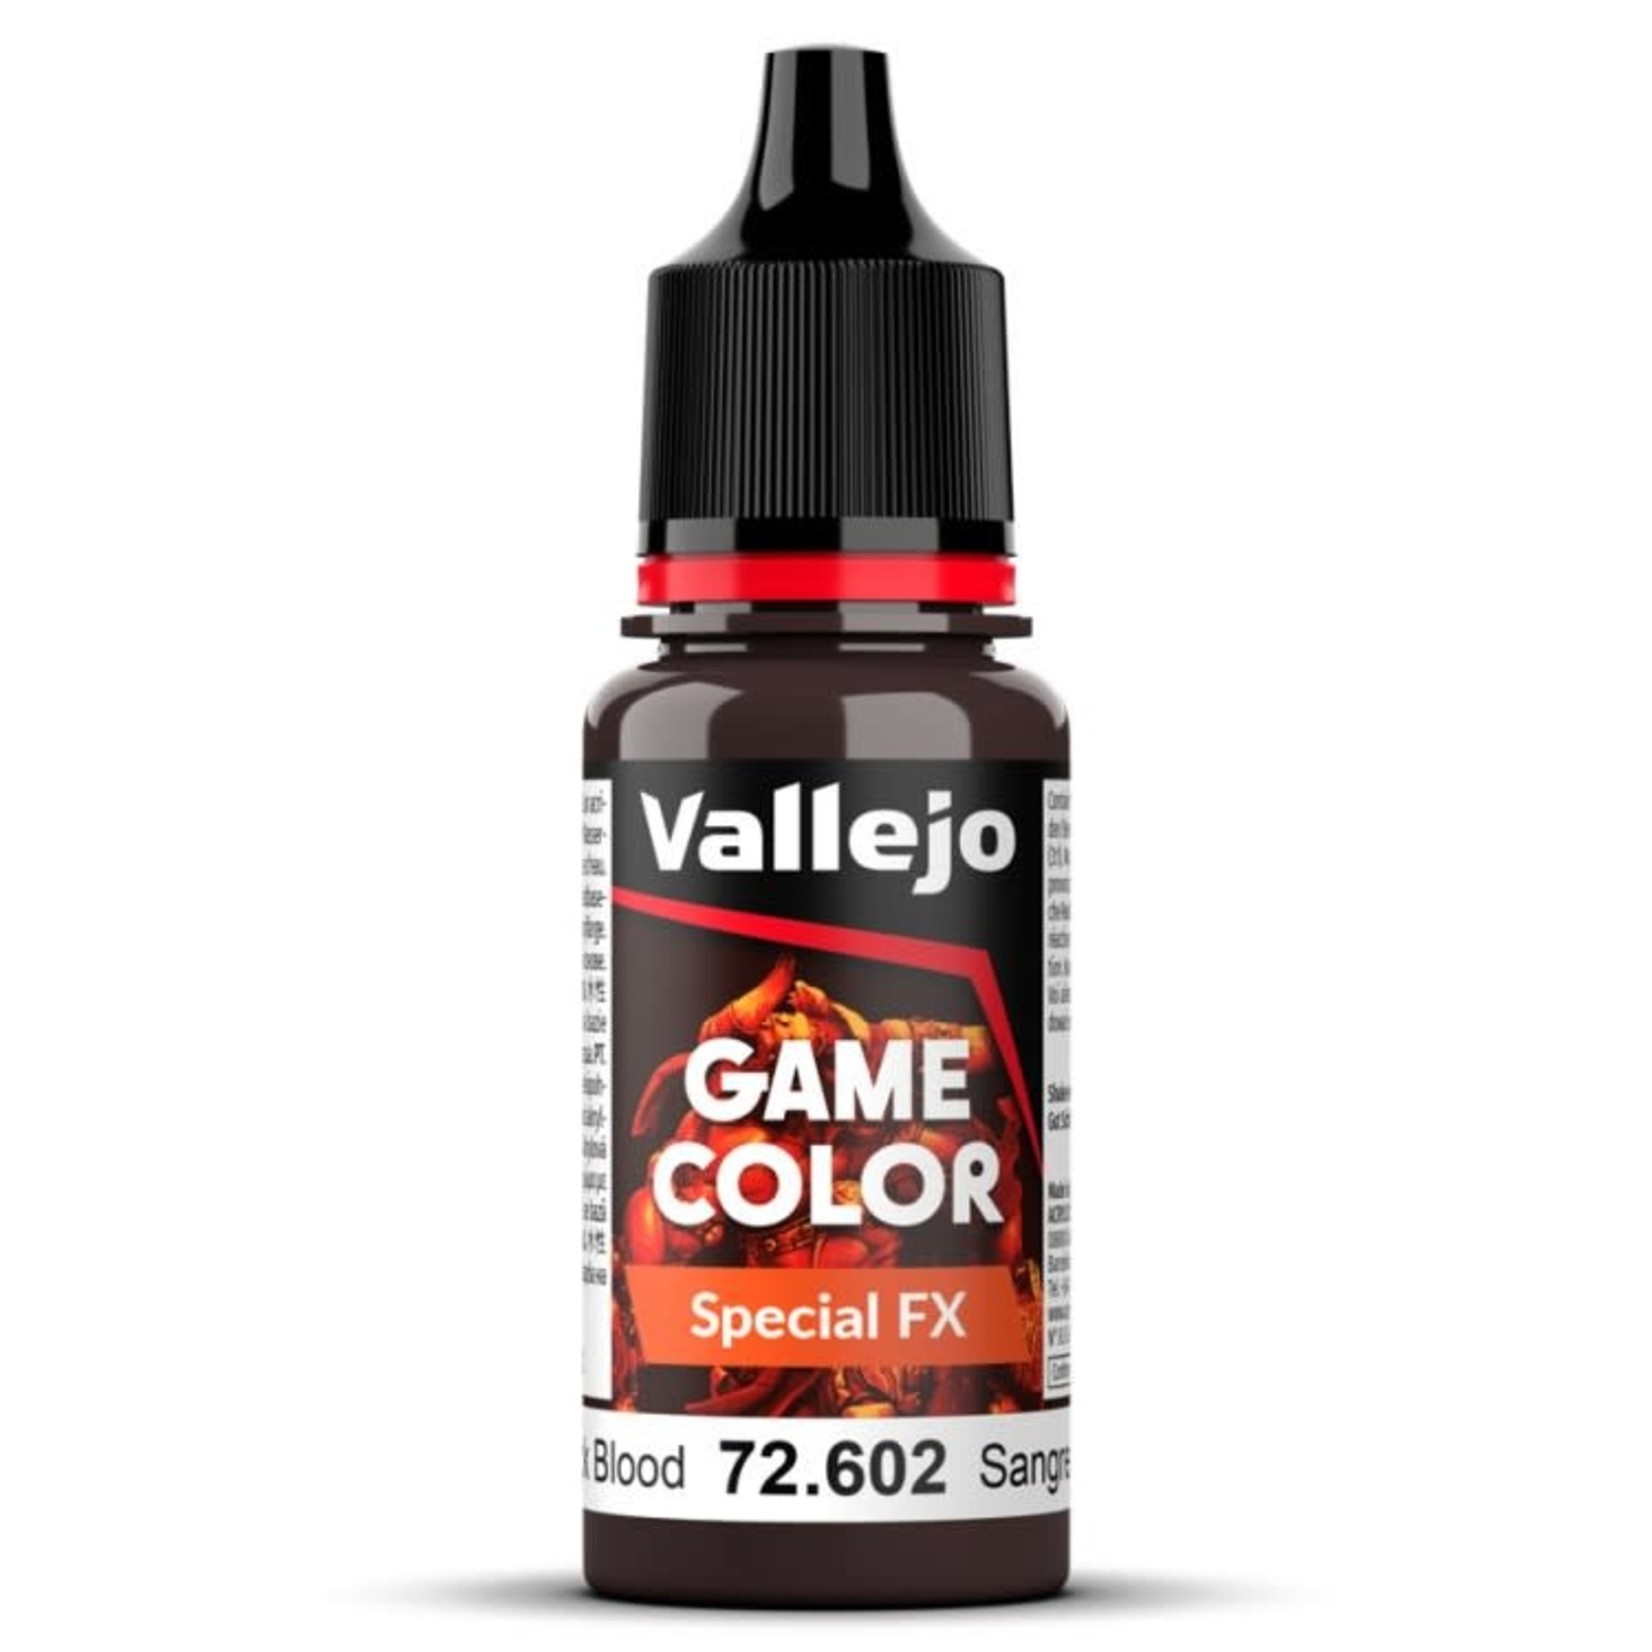 Vallejo Paint: Game Color, Special FX (Thick Blood)